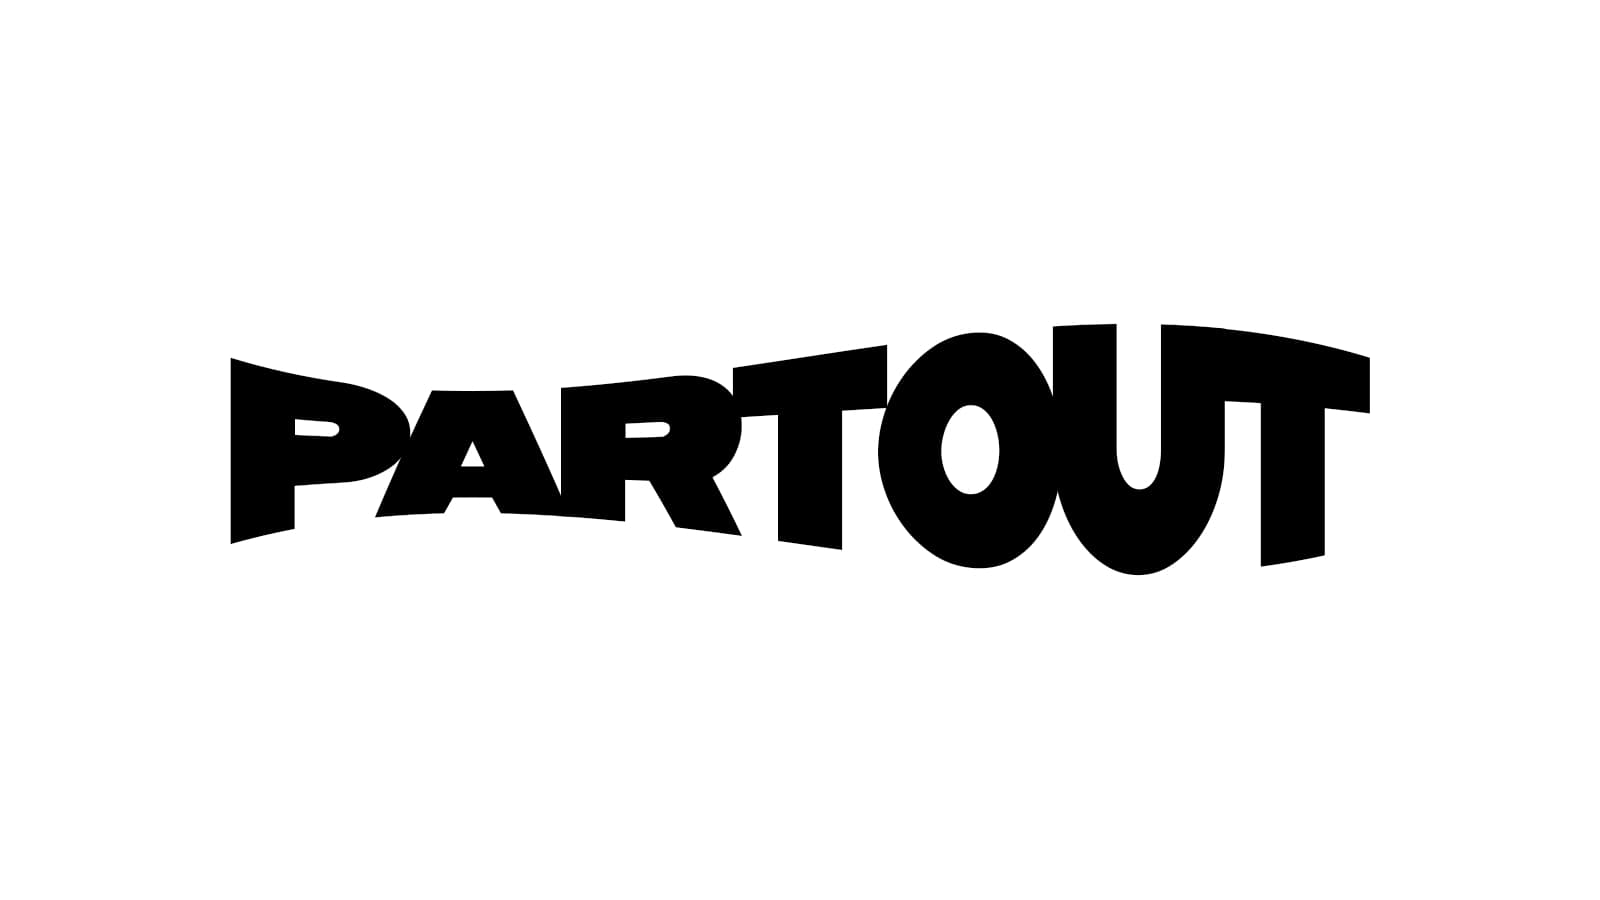 Search results for a query | PartOut